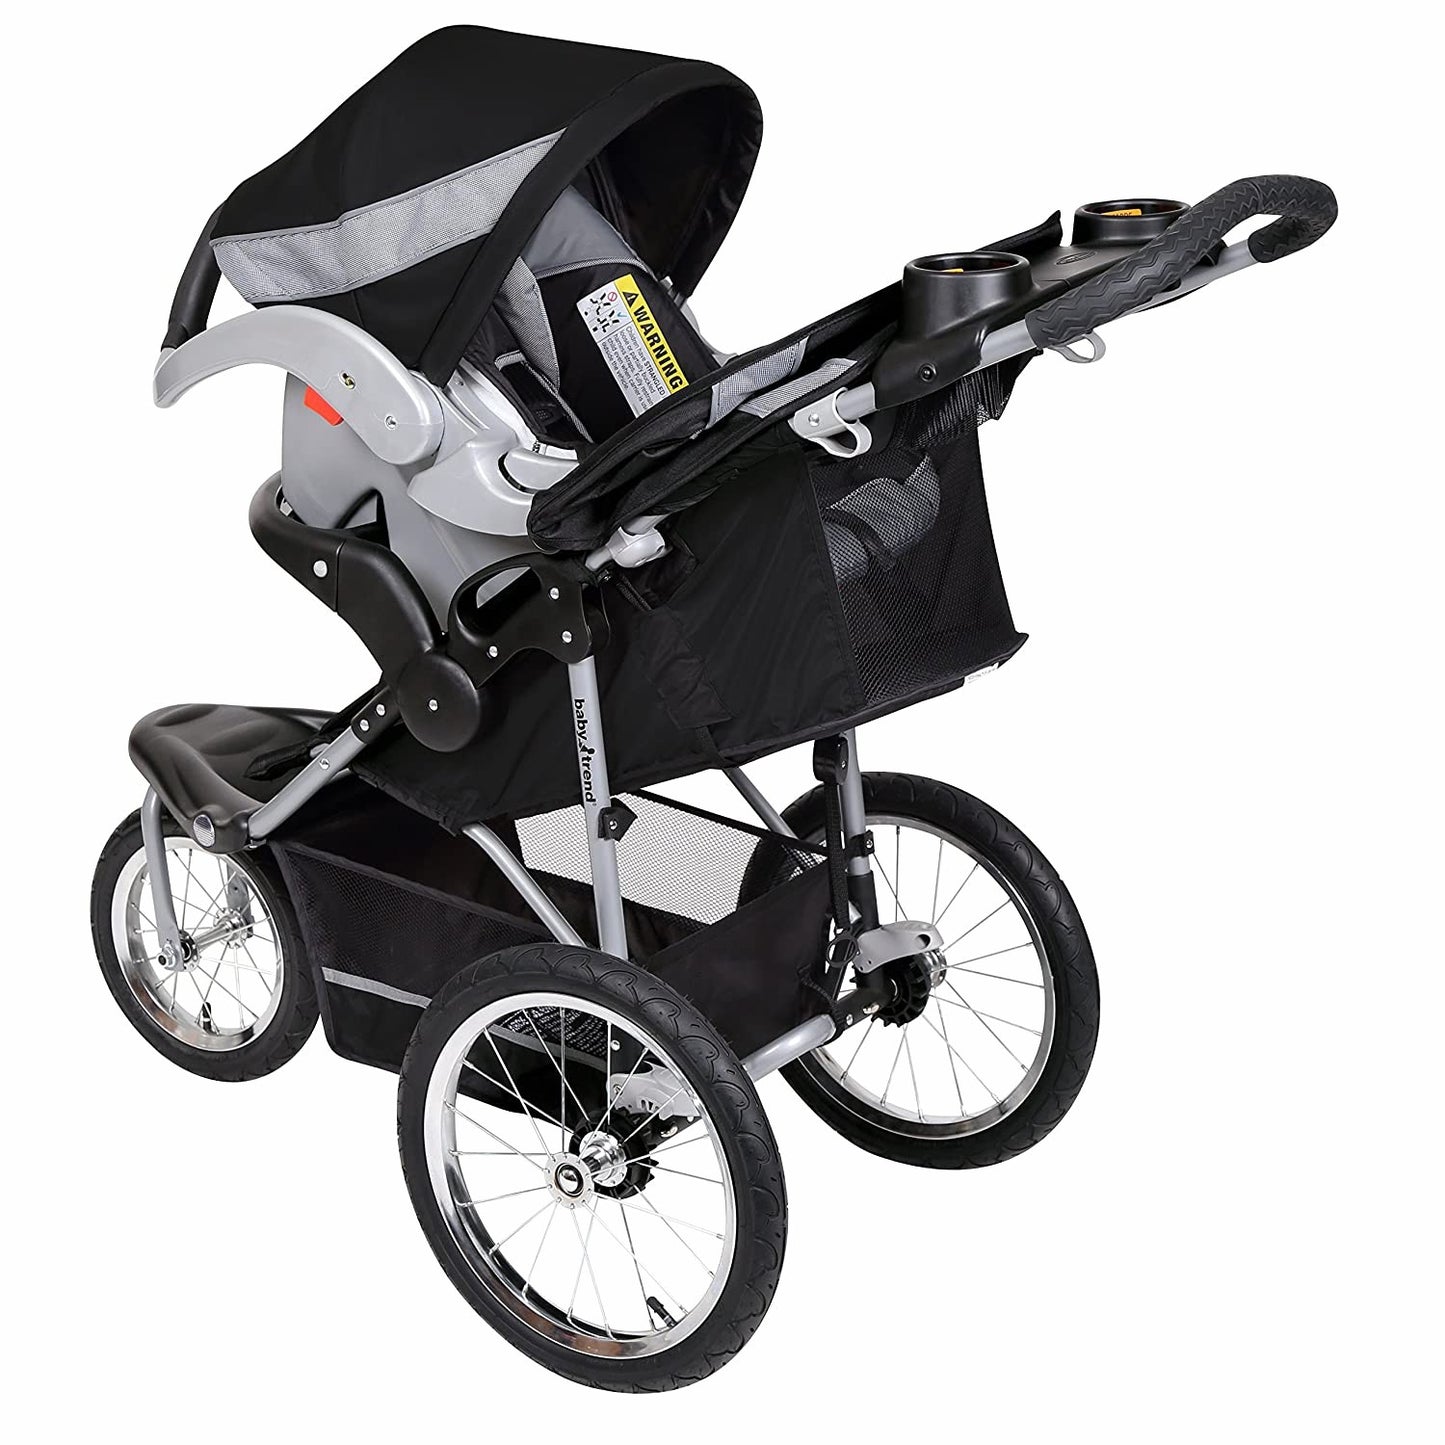 Baby Trend Expedition Travel System in Millennium White